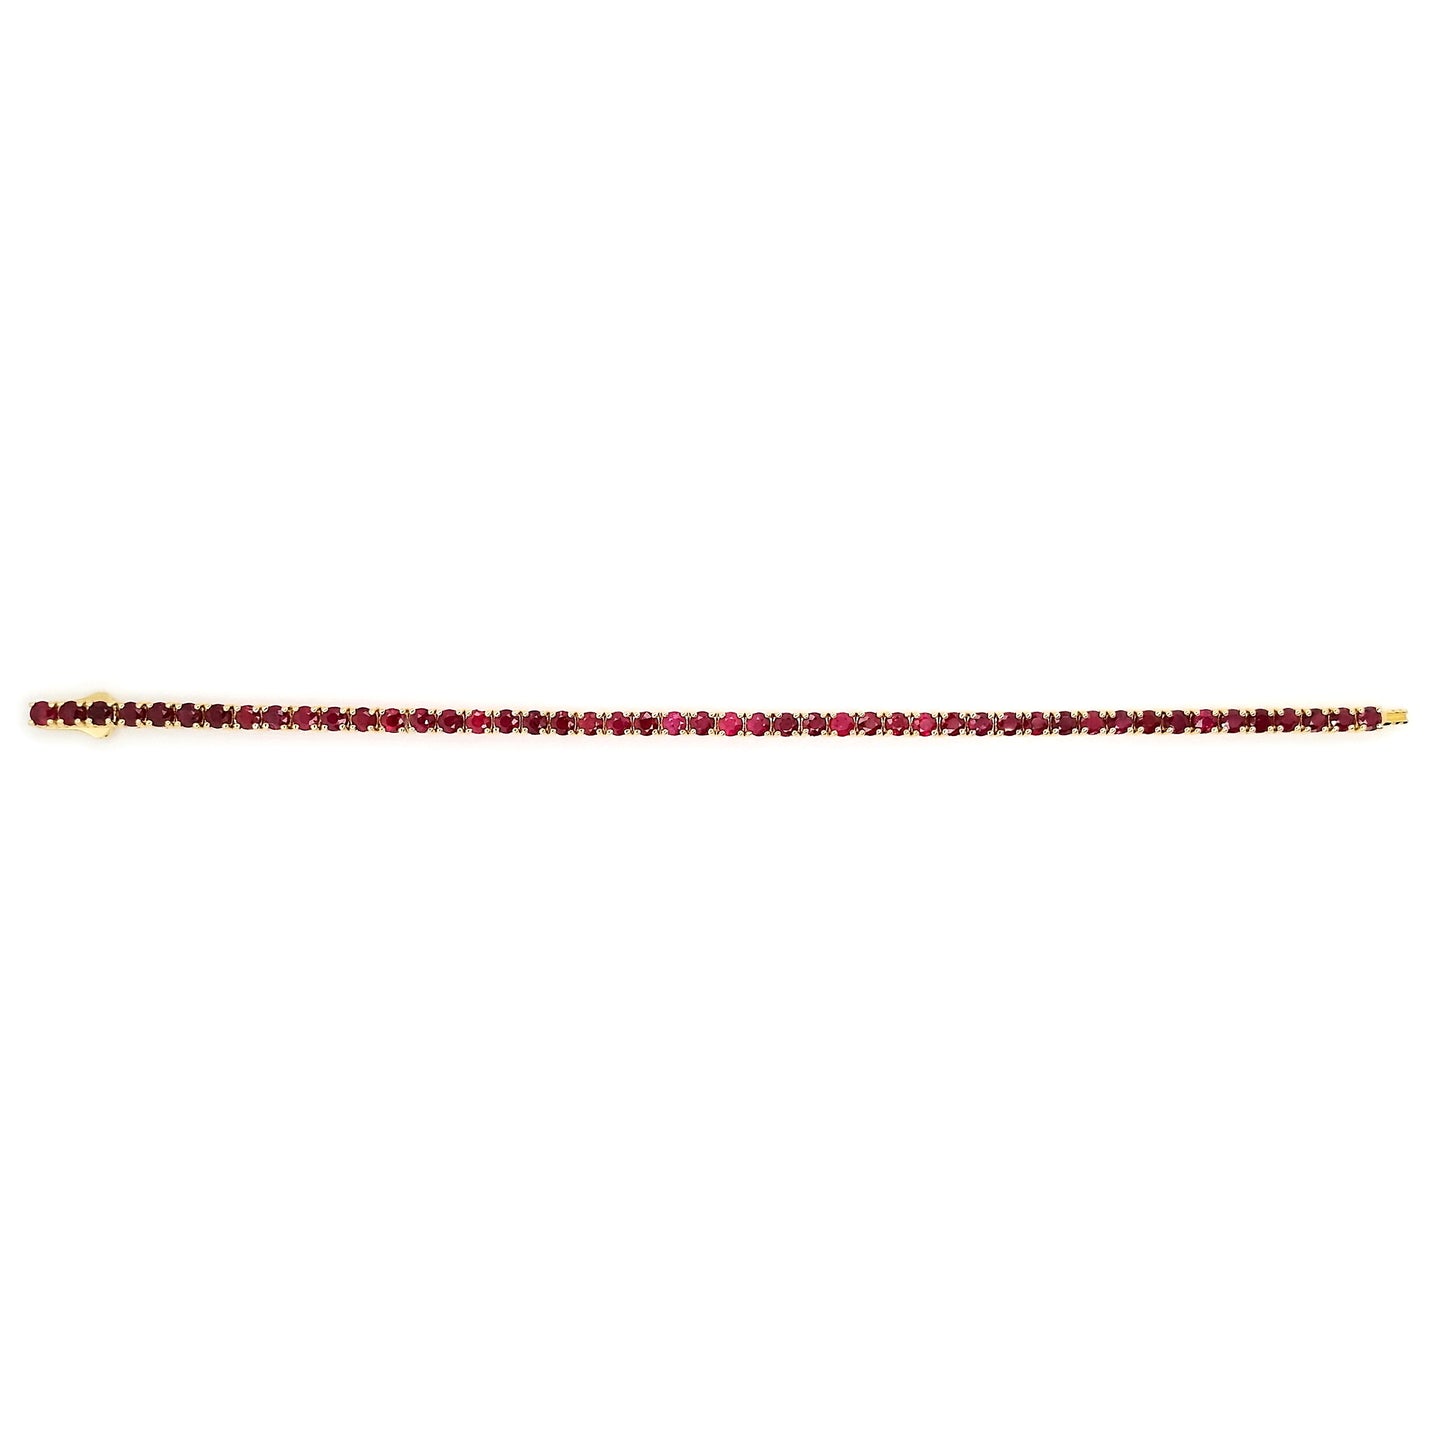 7.27ct Natural Rubies set with 14Kt Yellow Gold Bracelet - SALE